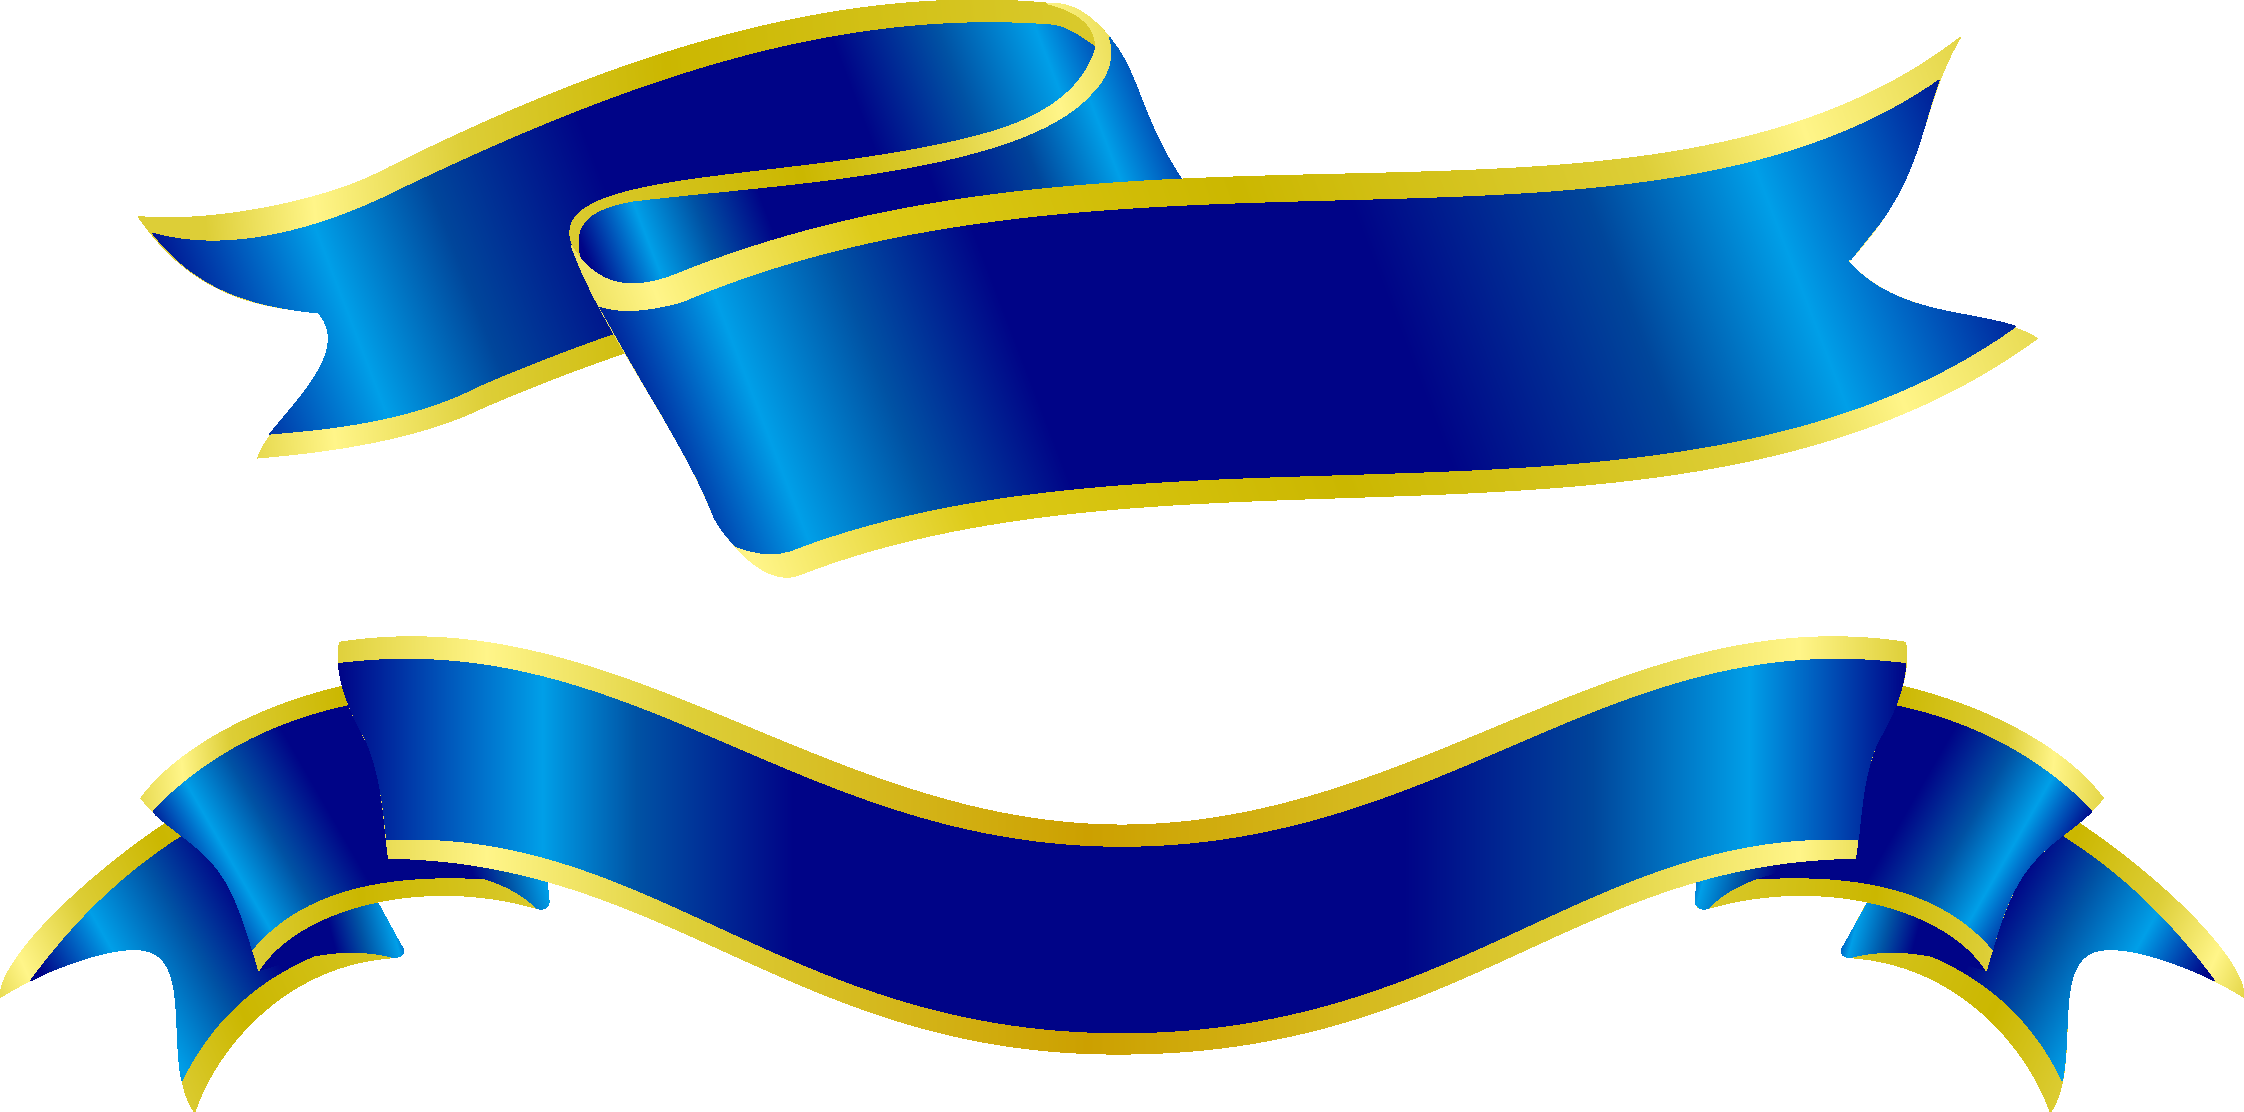 Government College Of Engineering, Thanjavur Euclidean - Ribbon Blue Logo (2244x1112)